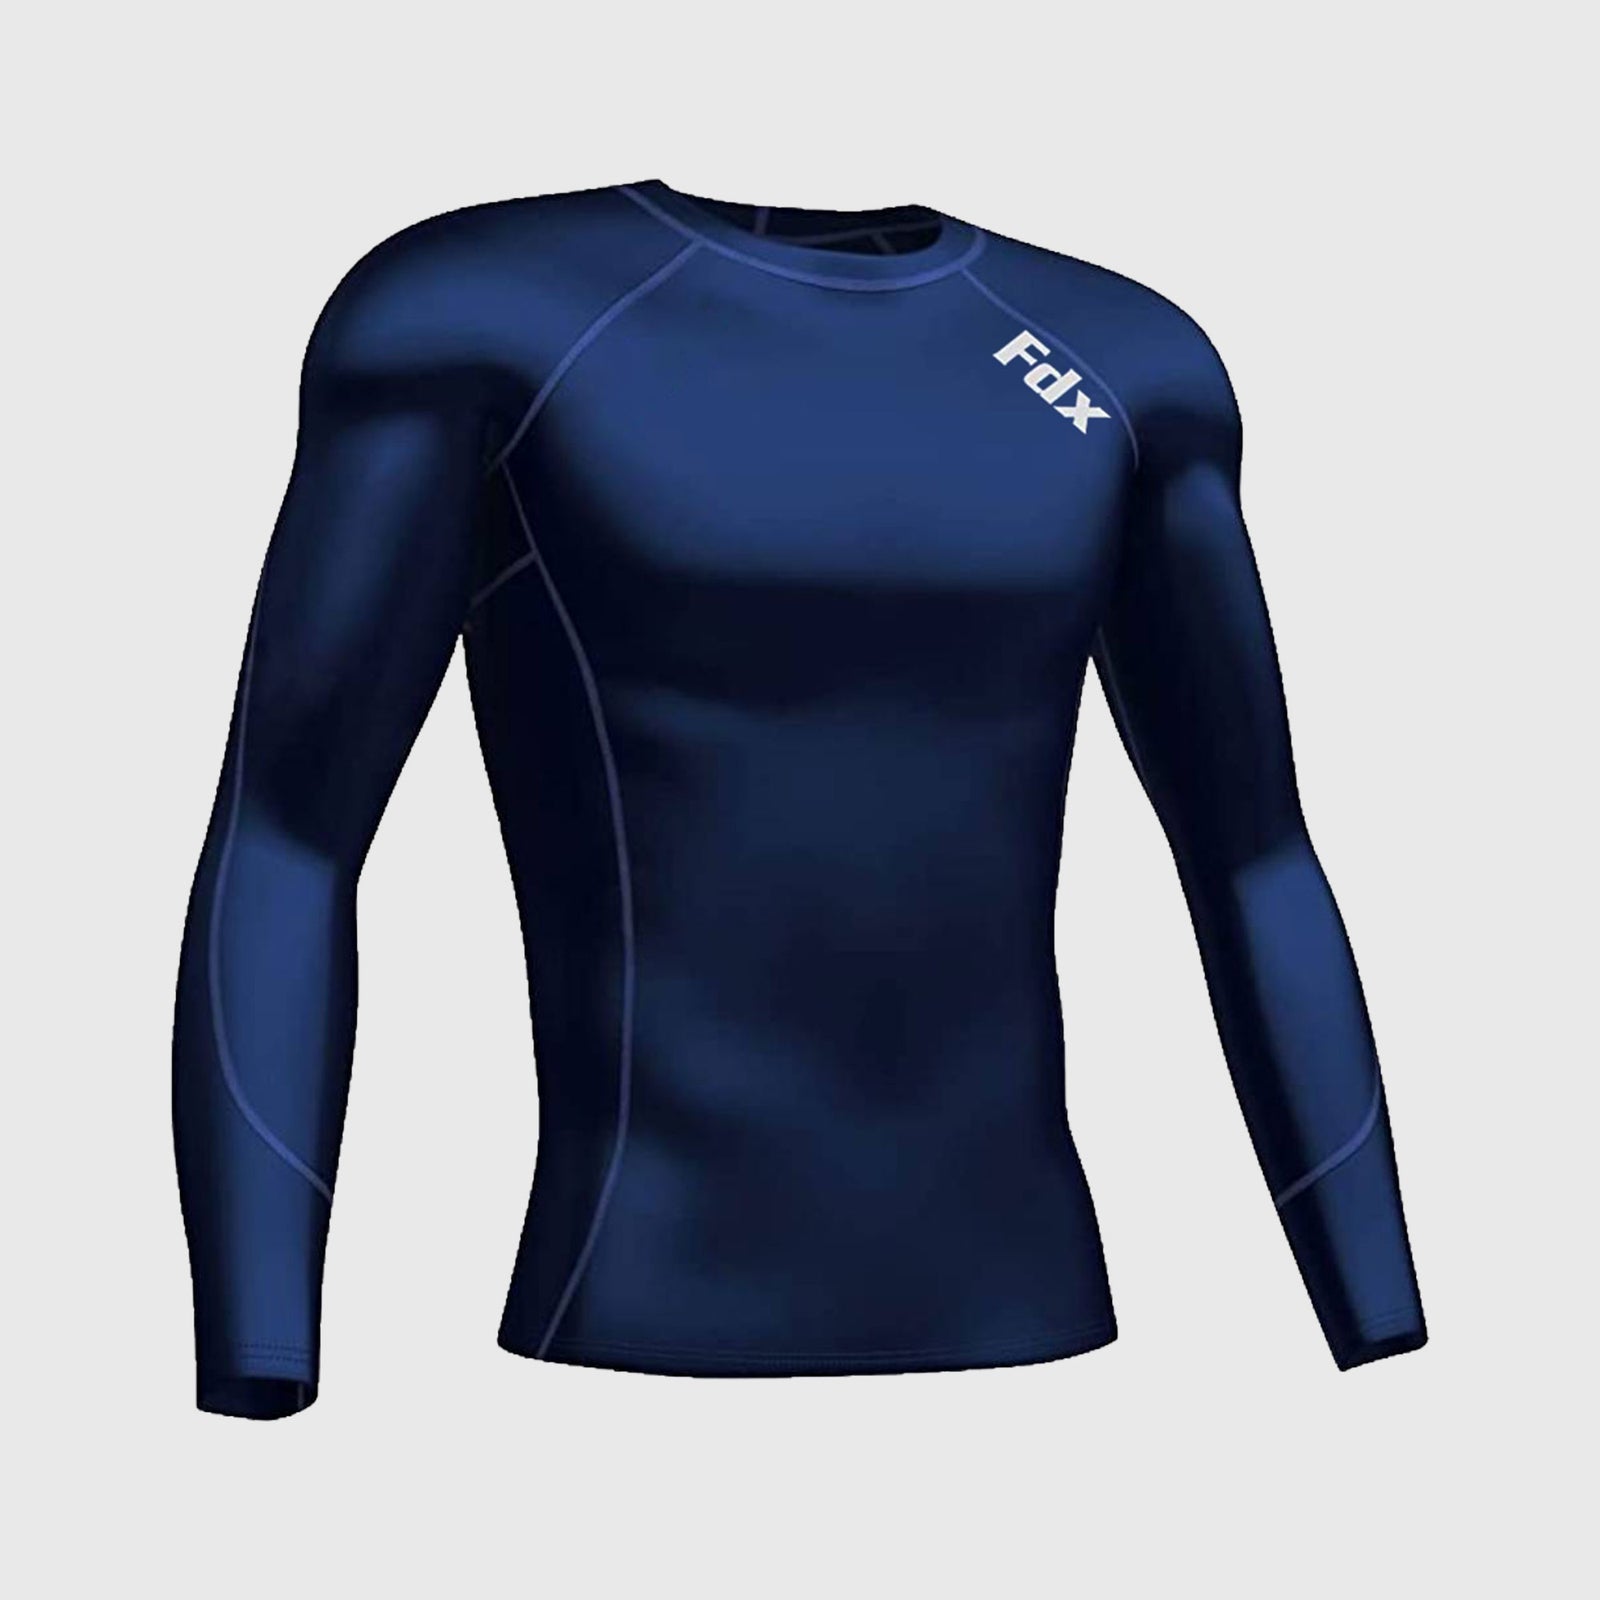 Athlete Seamless Gym Long Sleeve Top - Navy Blue, Women's Base Layers & Long  Sleeve Tops